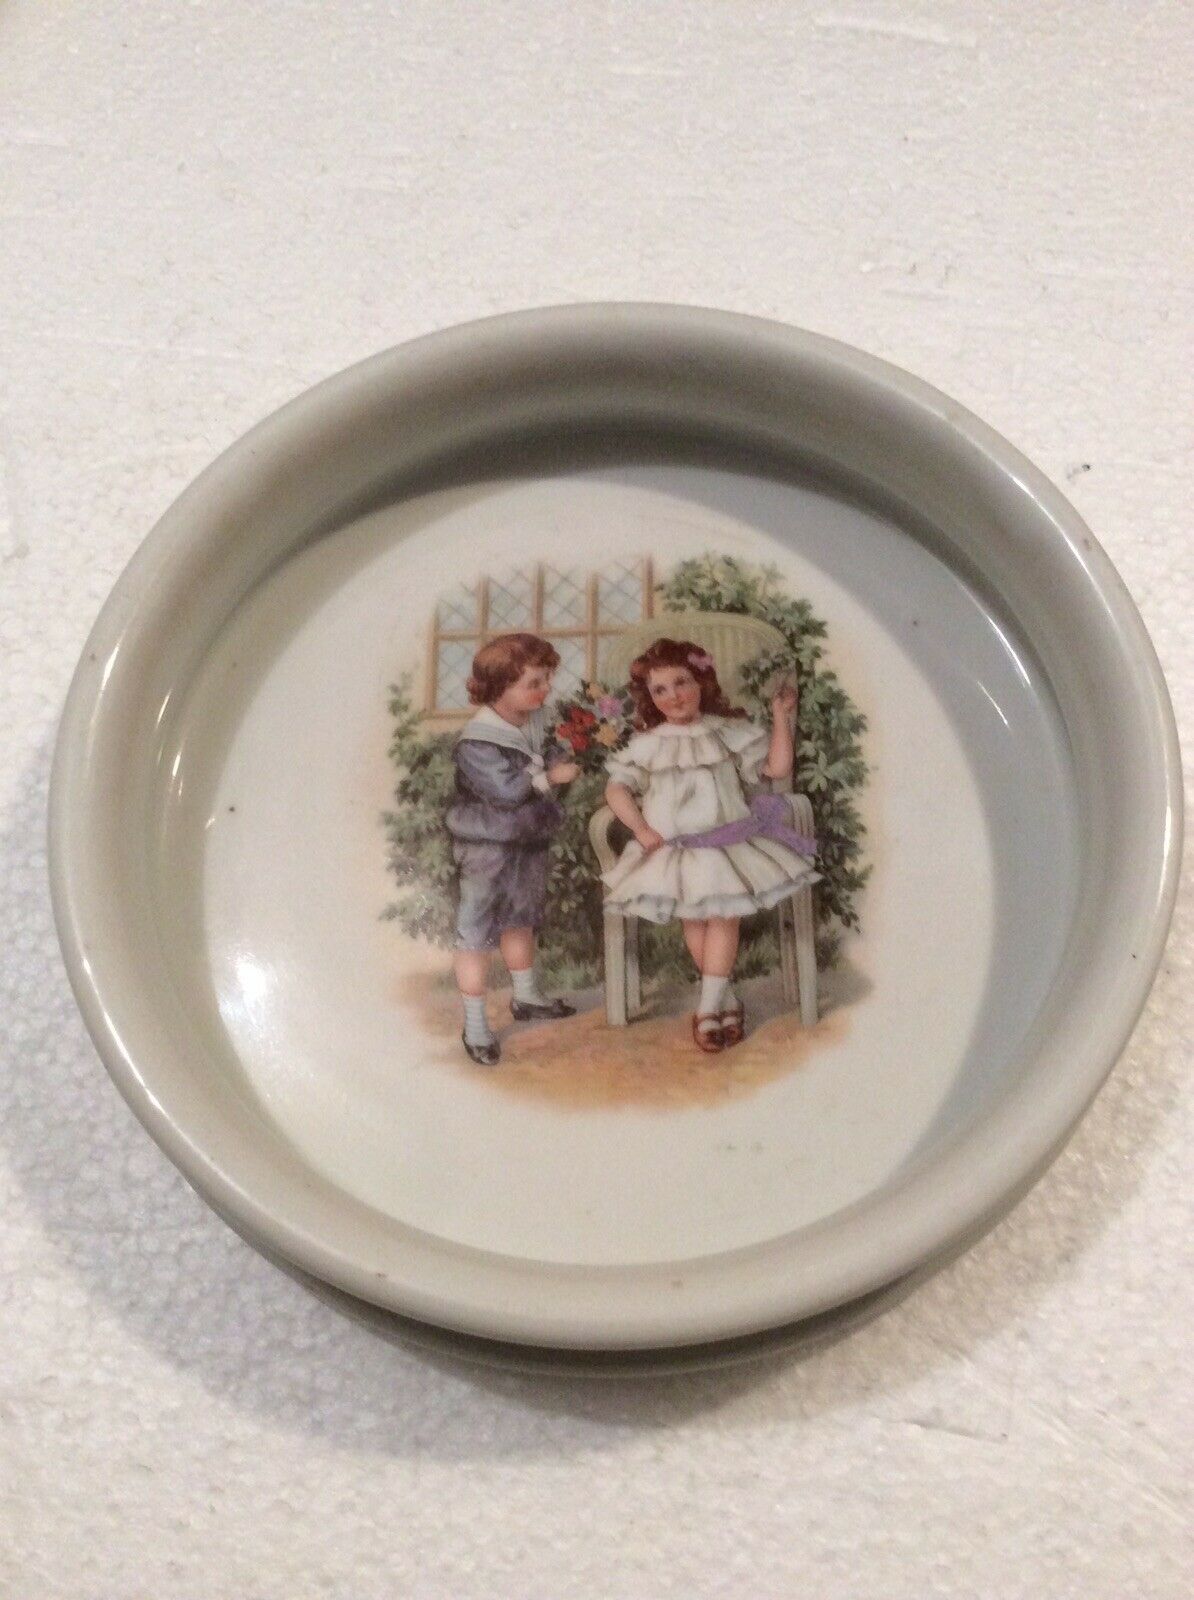 Antique: German (two Children Picking Flowers) Porcelain Child's Baby Bowl